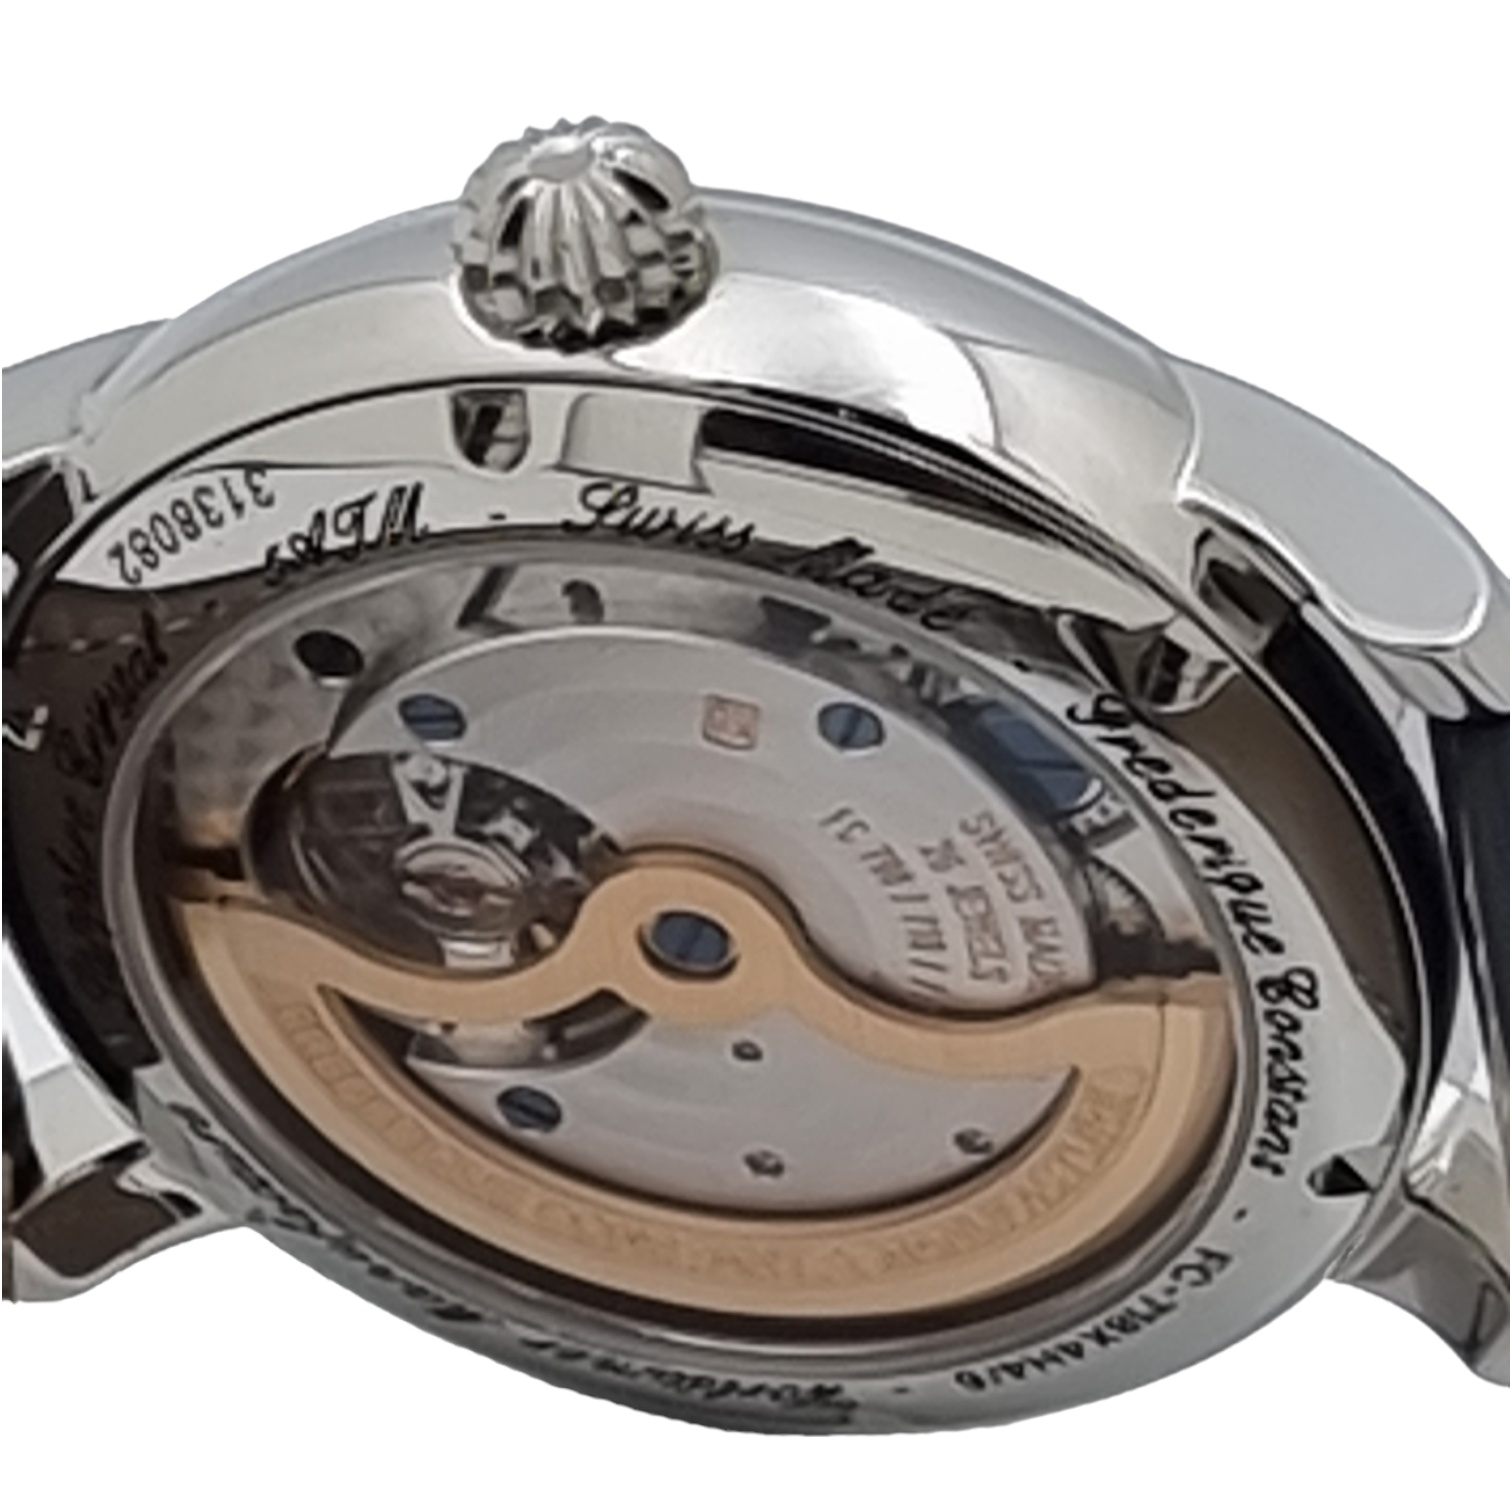 Frederique Constant Highlife Heart Beat Day-Date Ref. F680071 - ON5090 - LuxuryInStock